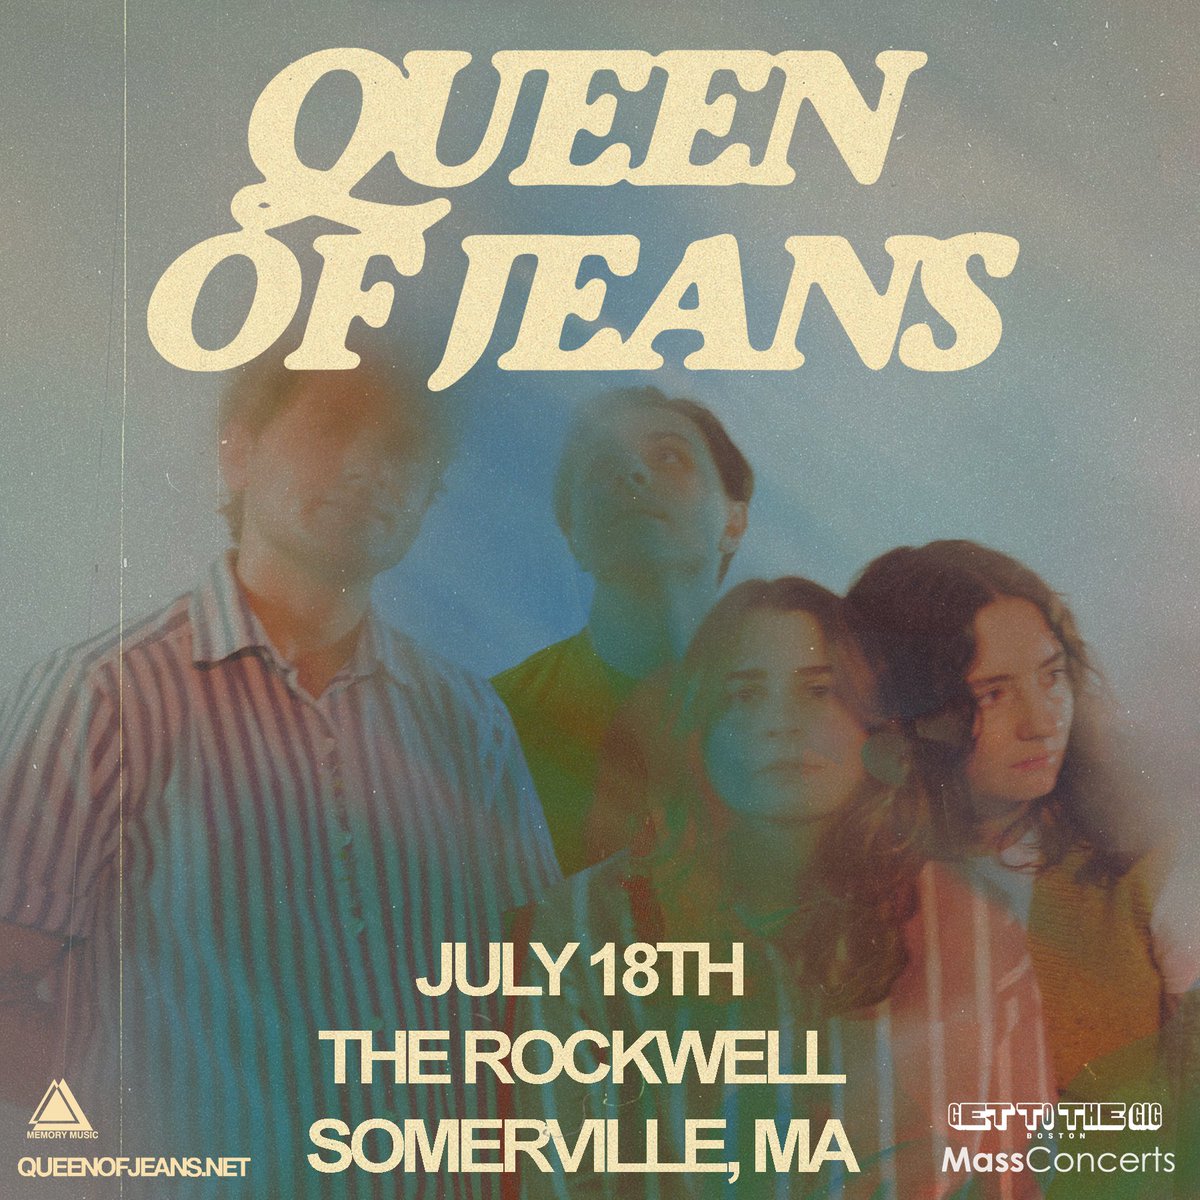 JUST ANNOUNCED: @queenofjeansPHL takes over the @RockwellThtr on 7/18! 🎟 on sale NOW here: seetickets.us/event/queen-of…